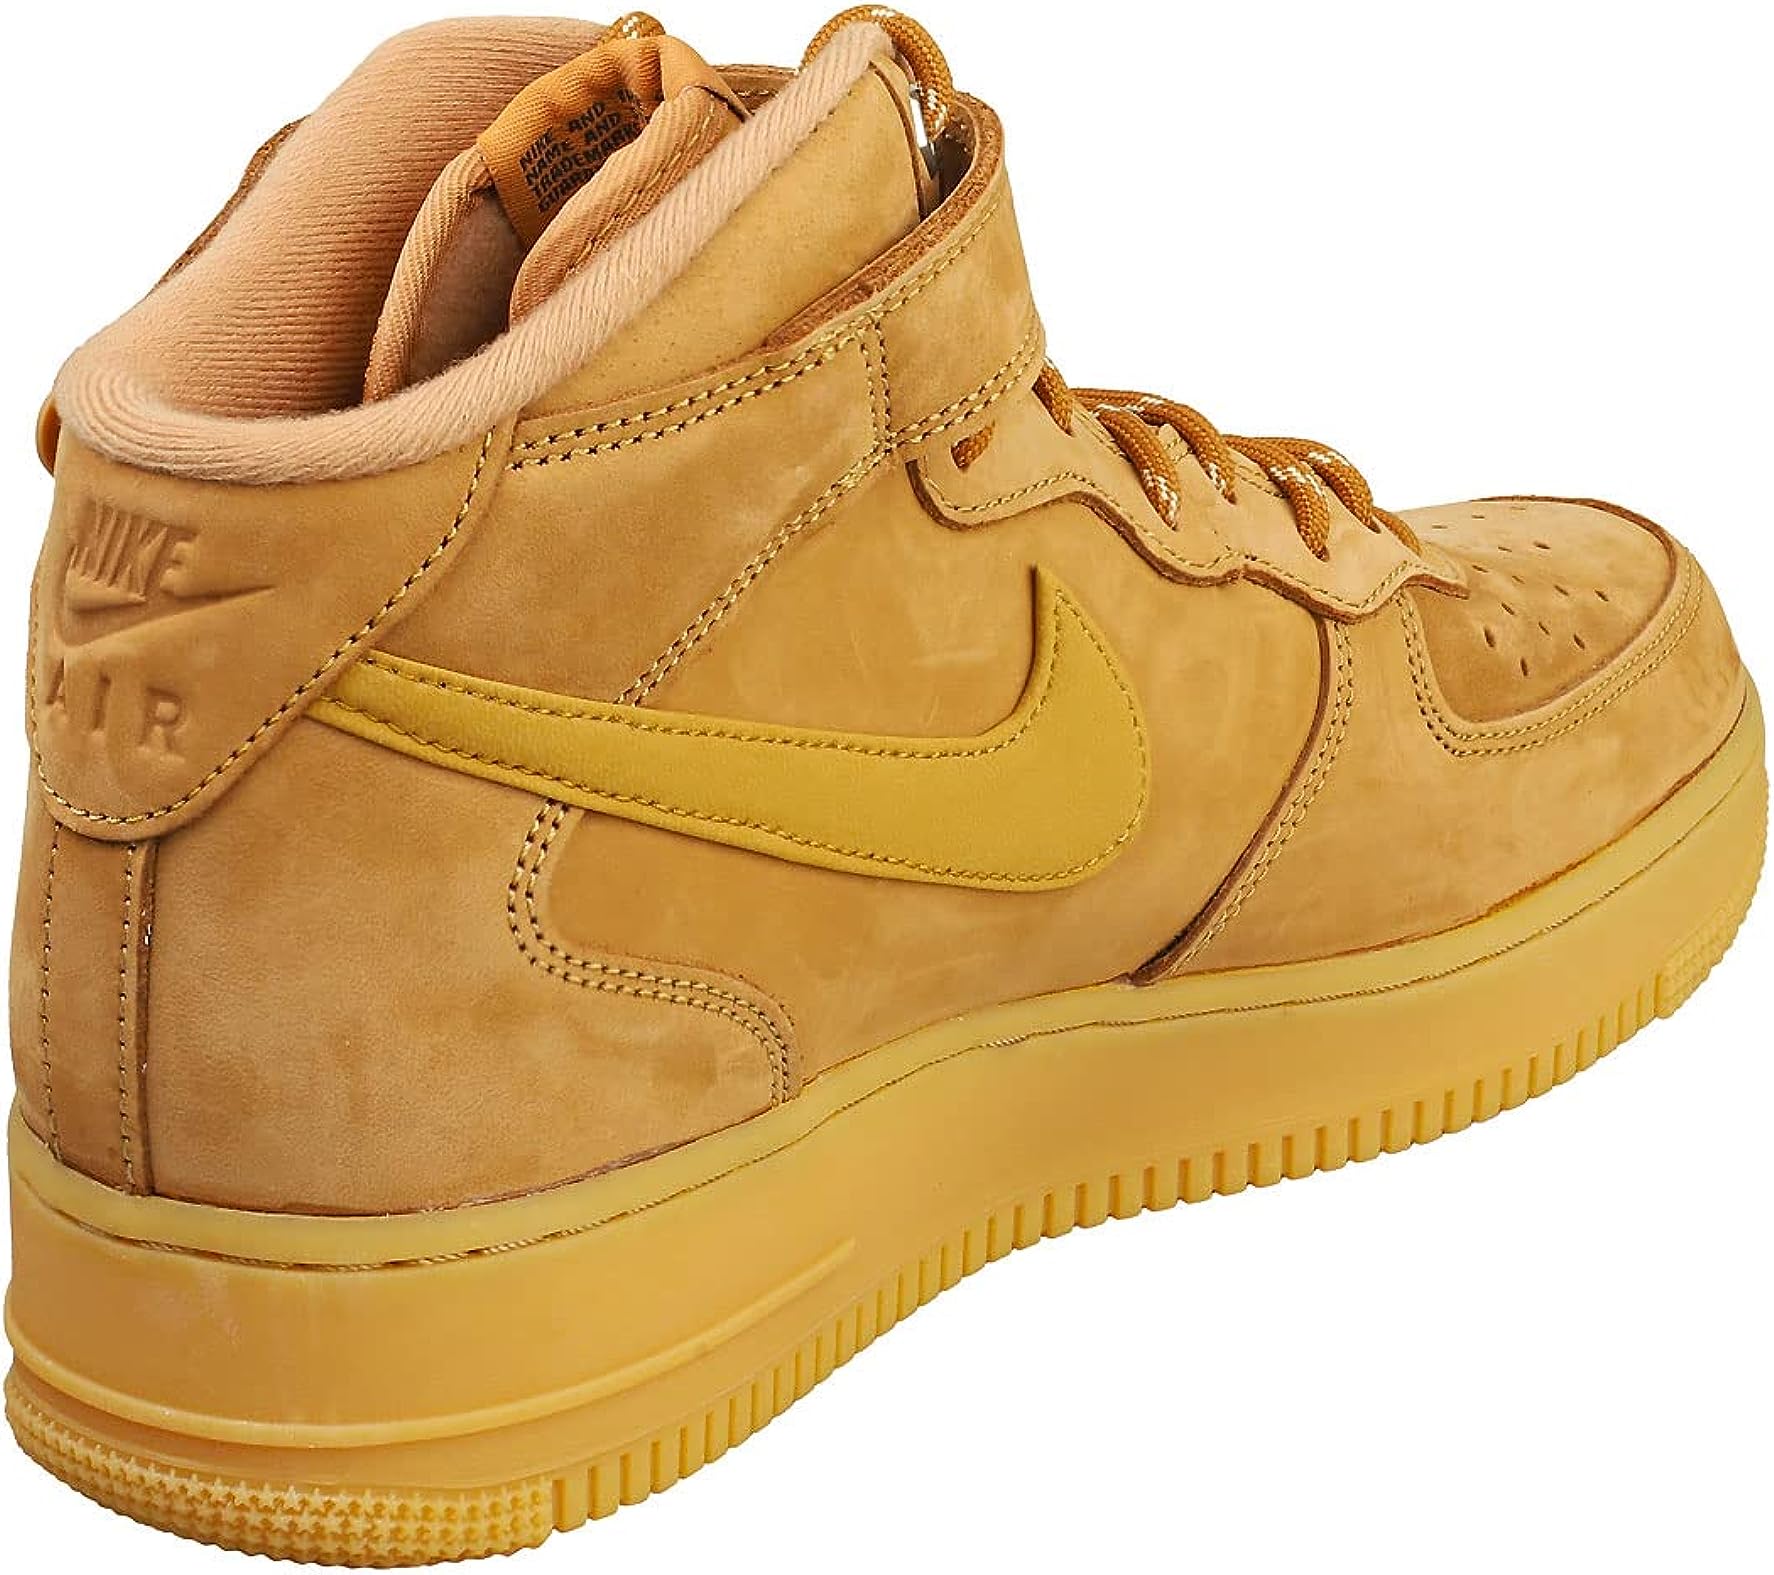 Nike Mens Air Force 1 Mid '07 Shoes